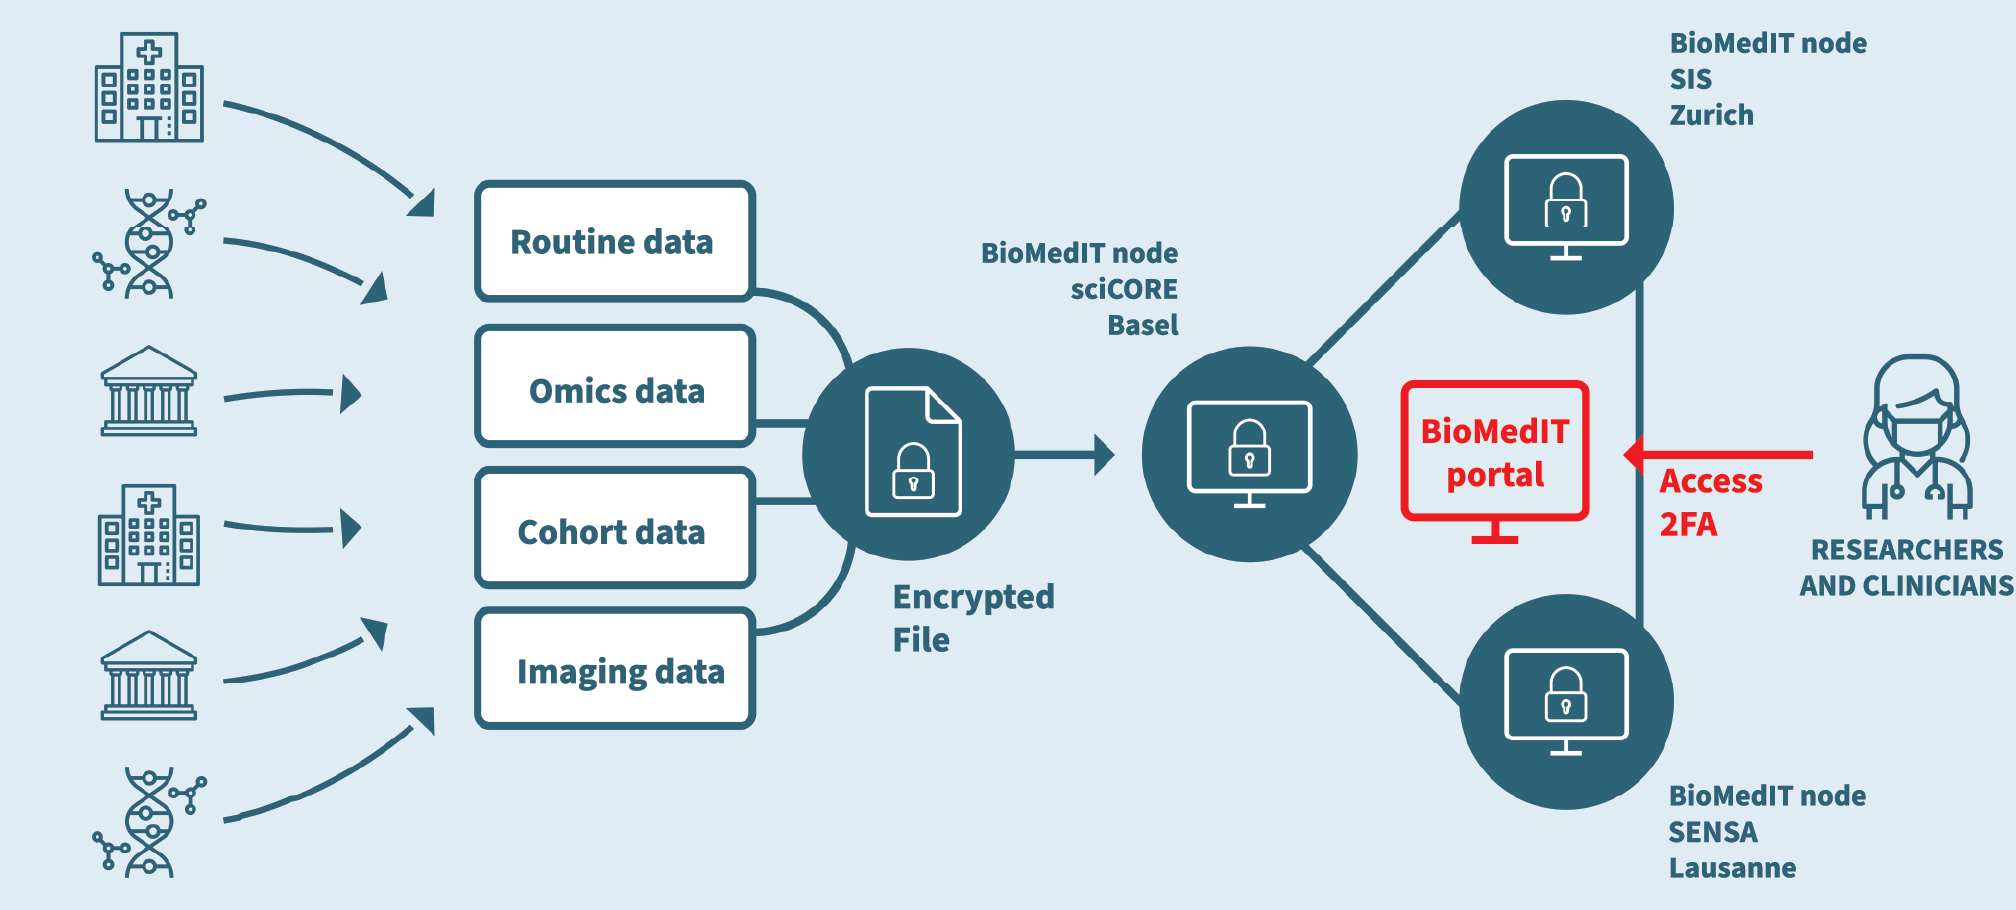 Figure: Interoperable health-related data from different sources are locally encrypted and transferred into the secure BioMedIT network, where they can be accessed by authorized researchers and clinicians conducting collaborative research projects. 